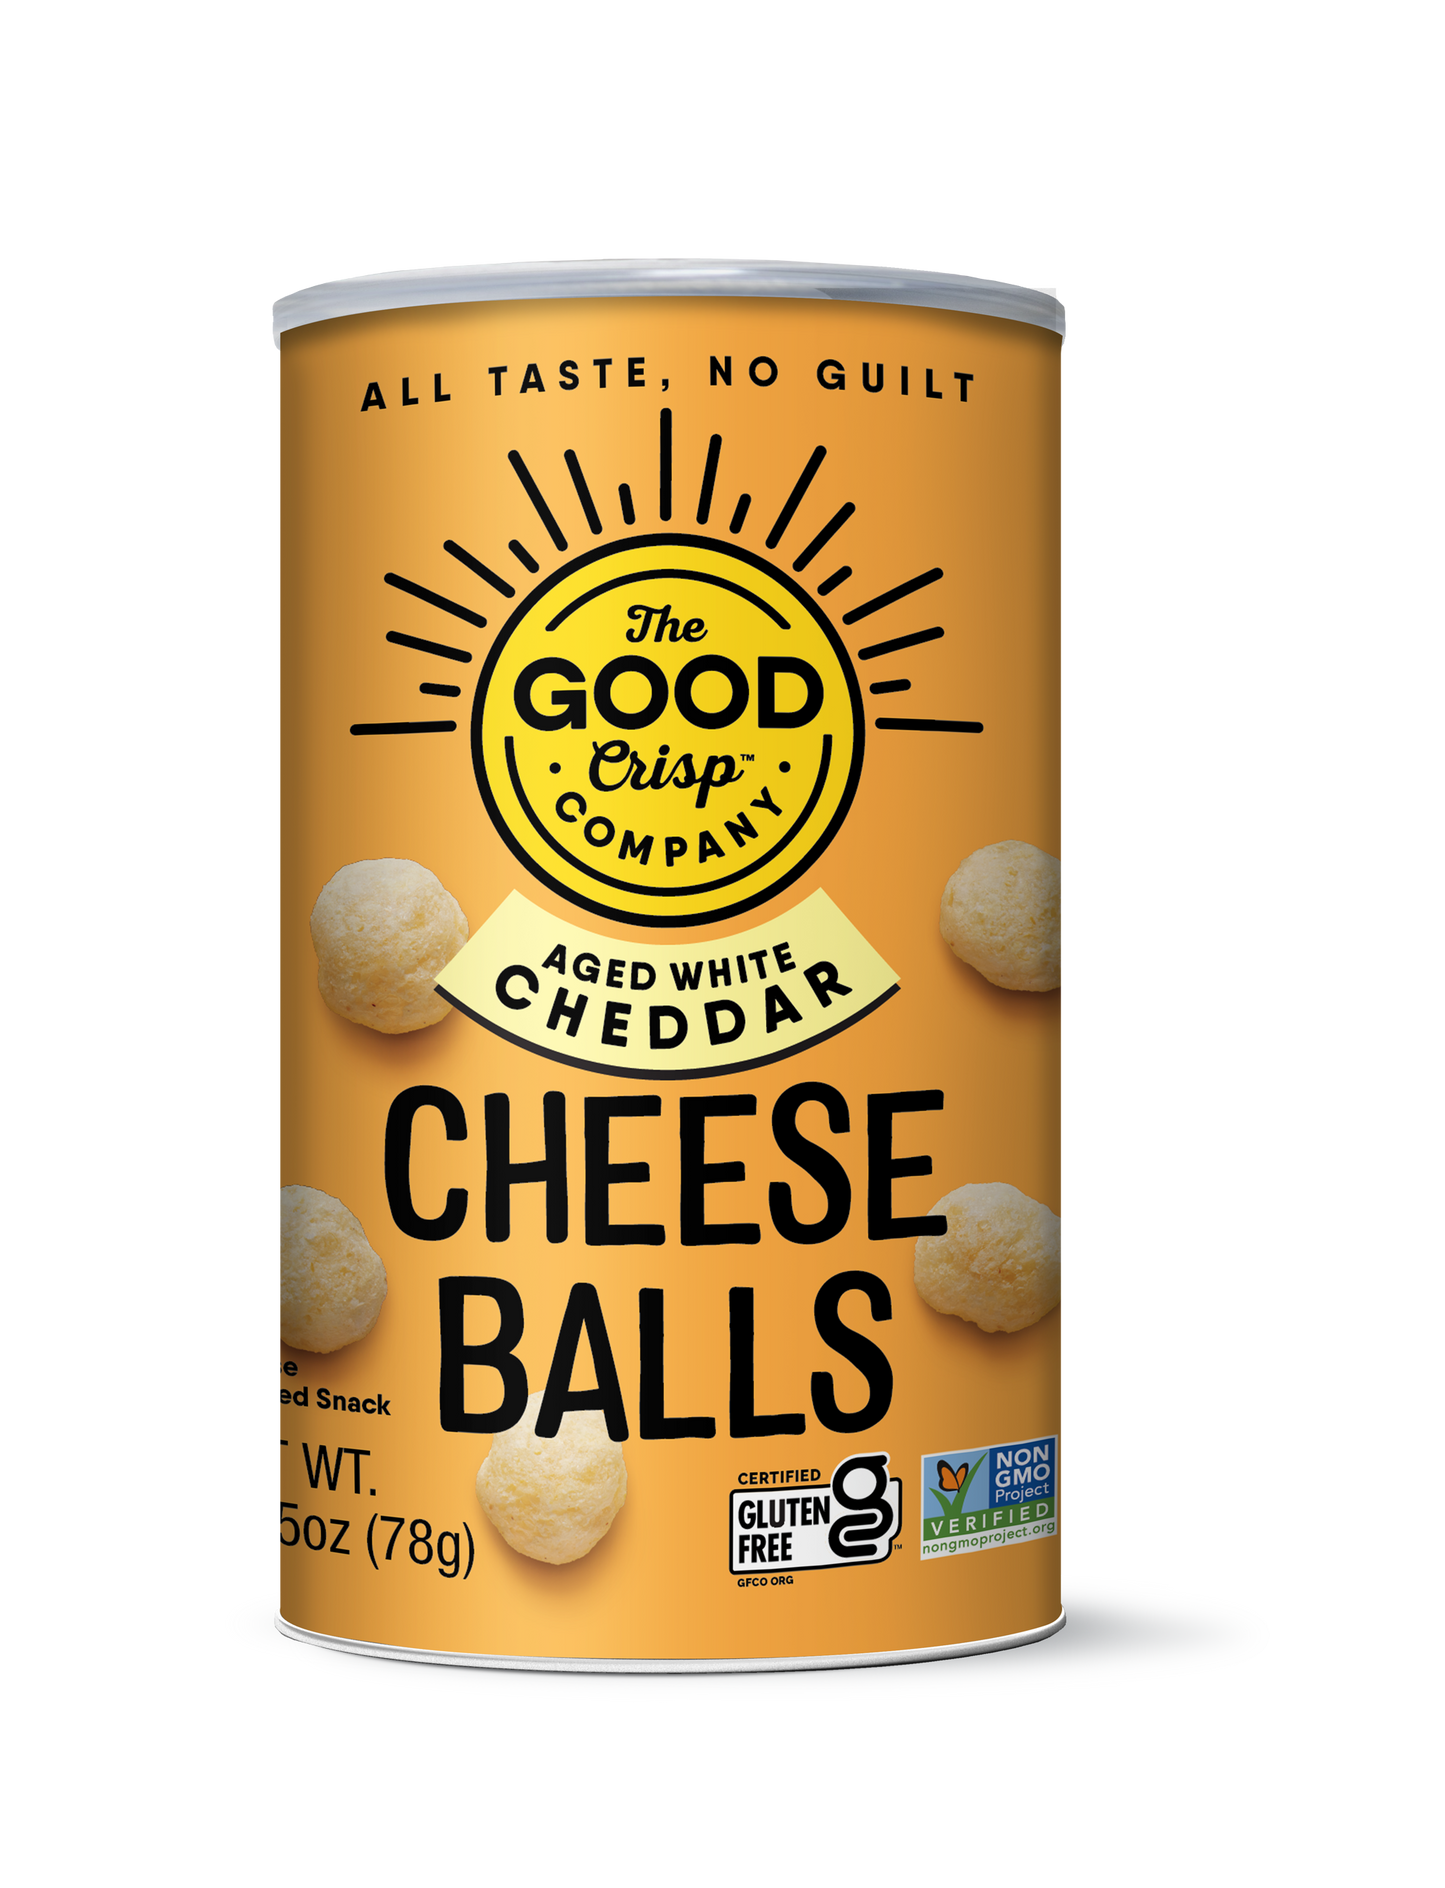 The Good Crisp Company - Aged White Cheddar Cheese Balls